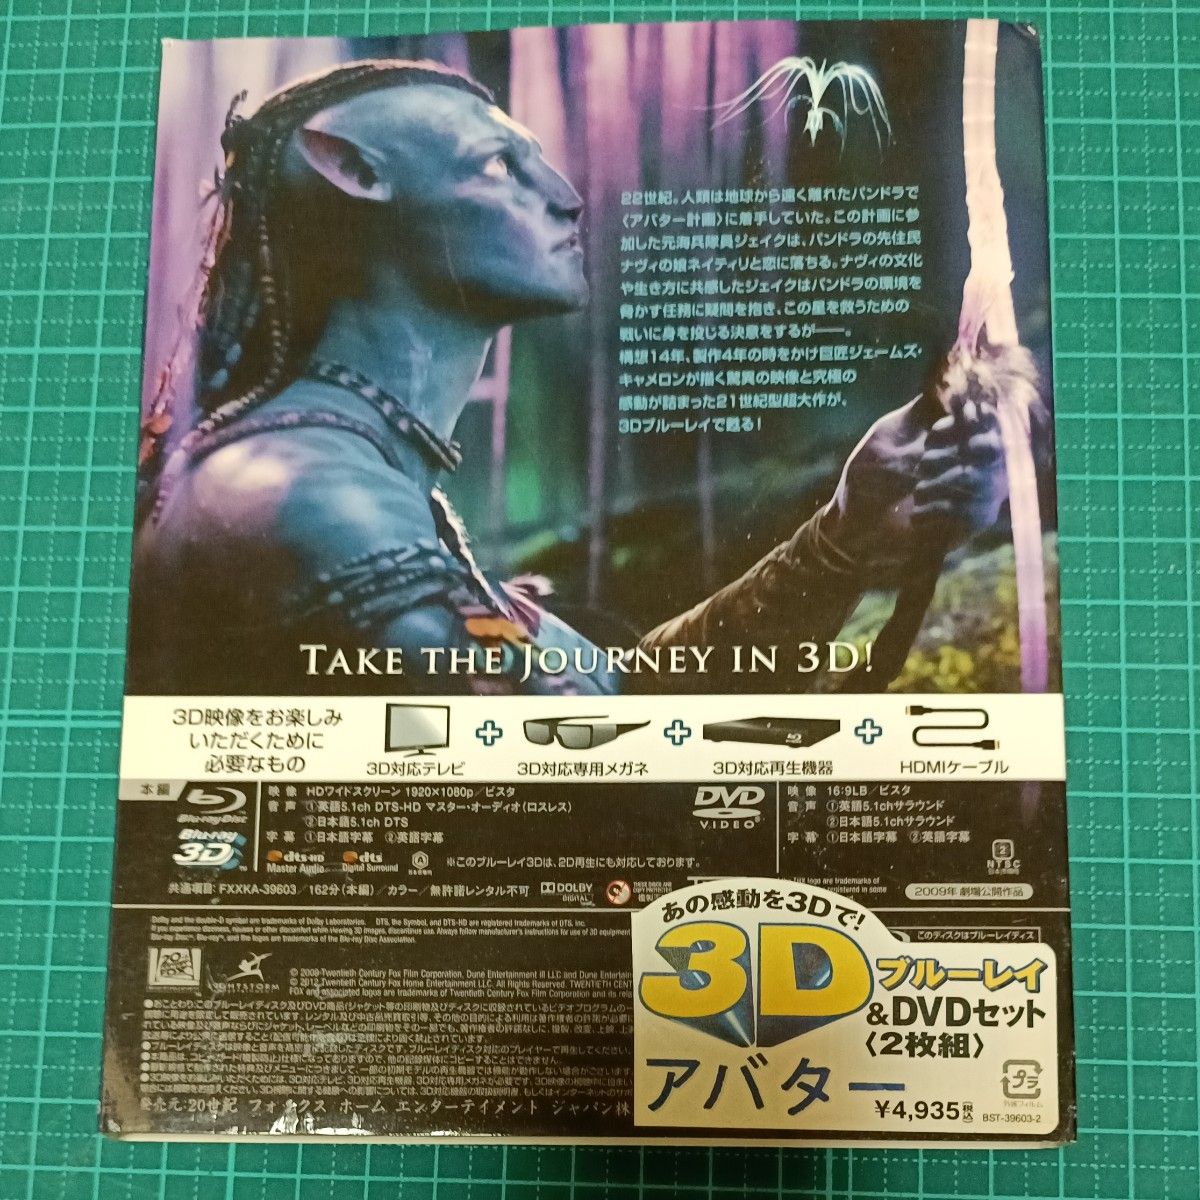 AVATAR LIMITED 3D EDITION BD&DVDセット